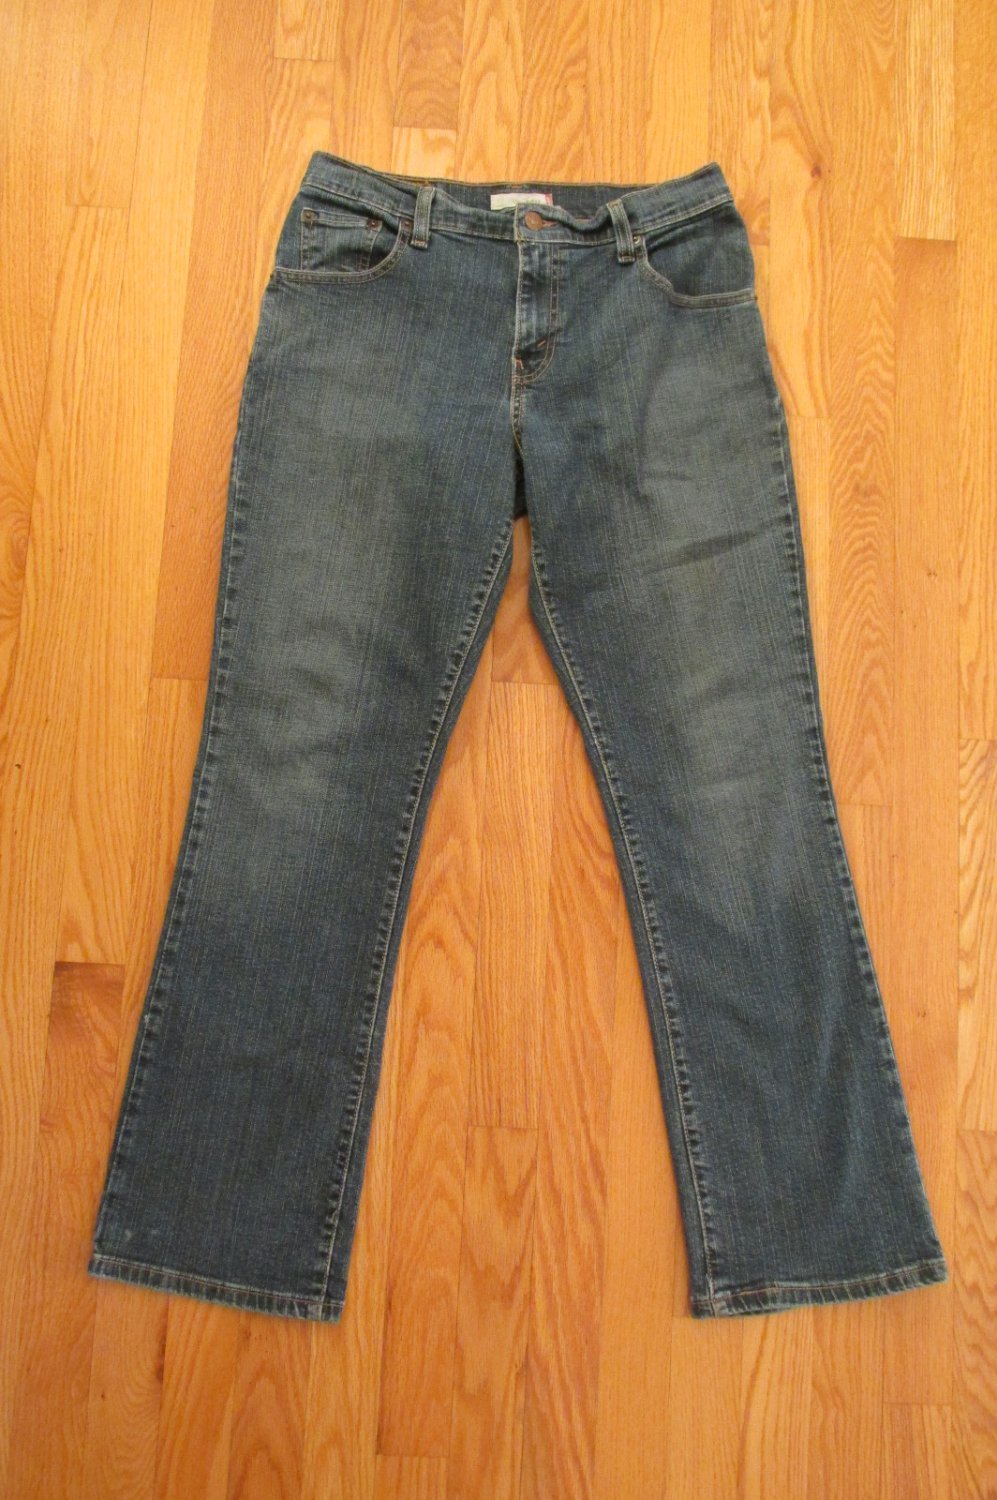 LEVI'S 550 WOMEN'S SIZE 6 S JEANS MED. BLUE DENIM RELAXED BOOT CUT ...